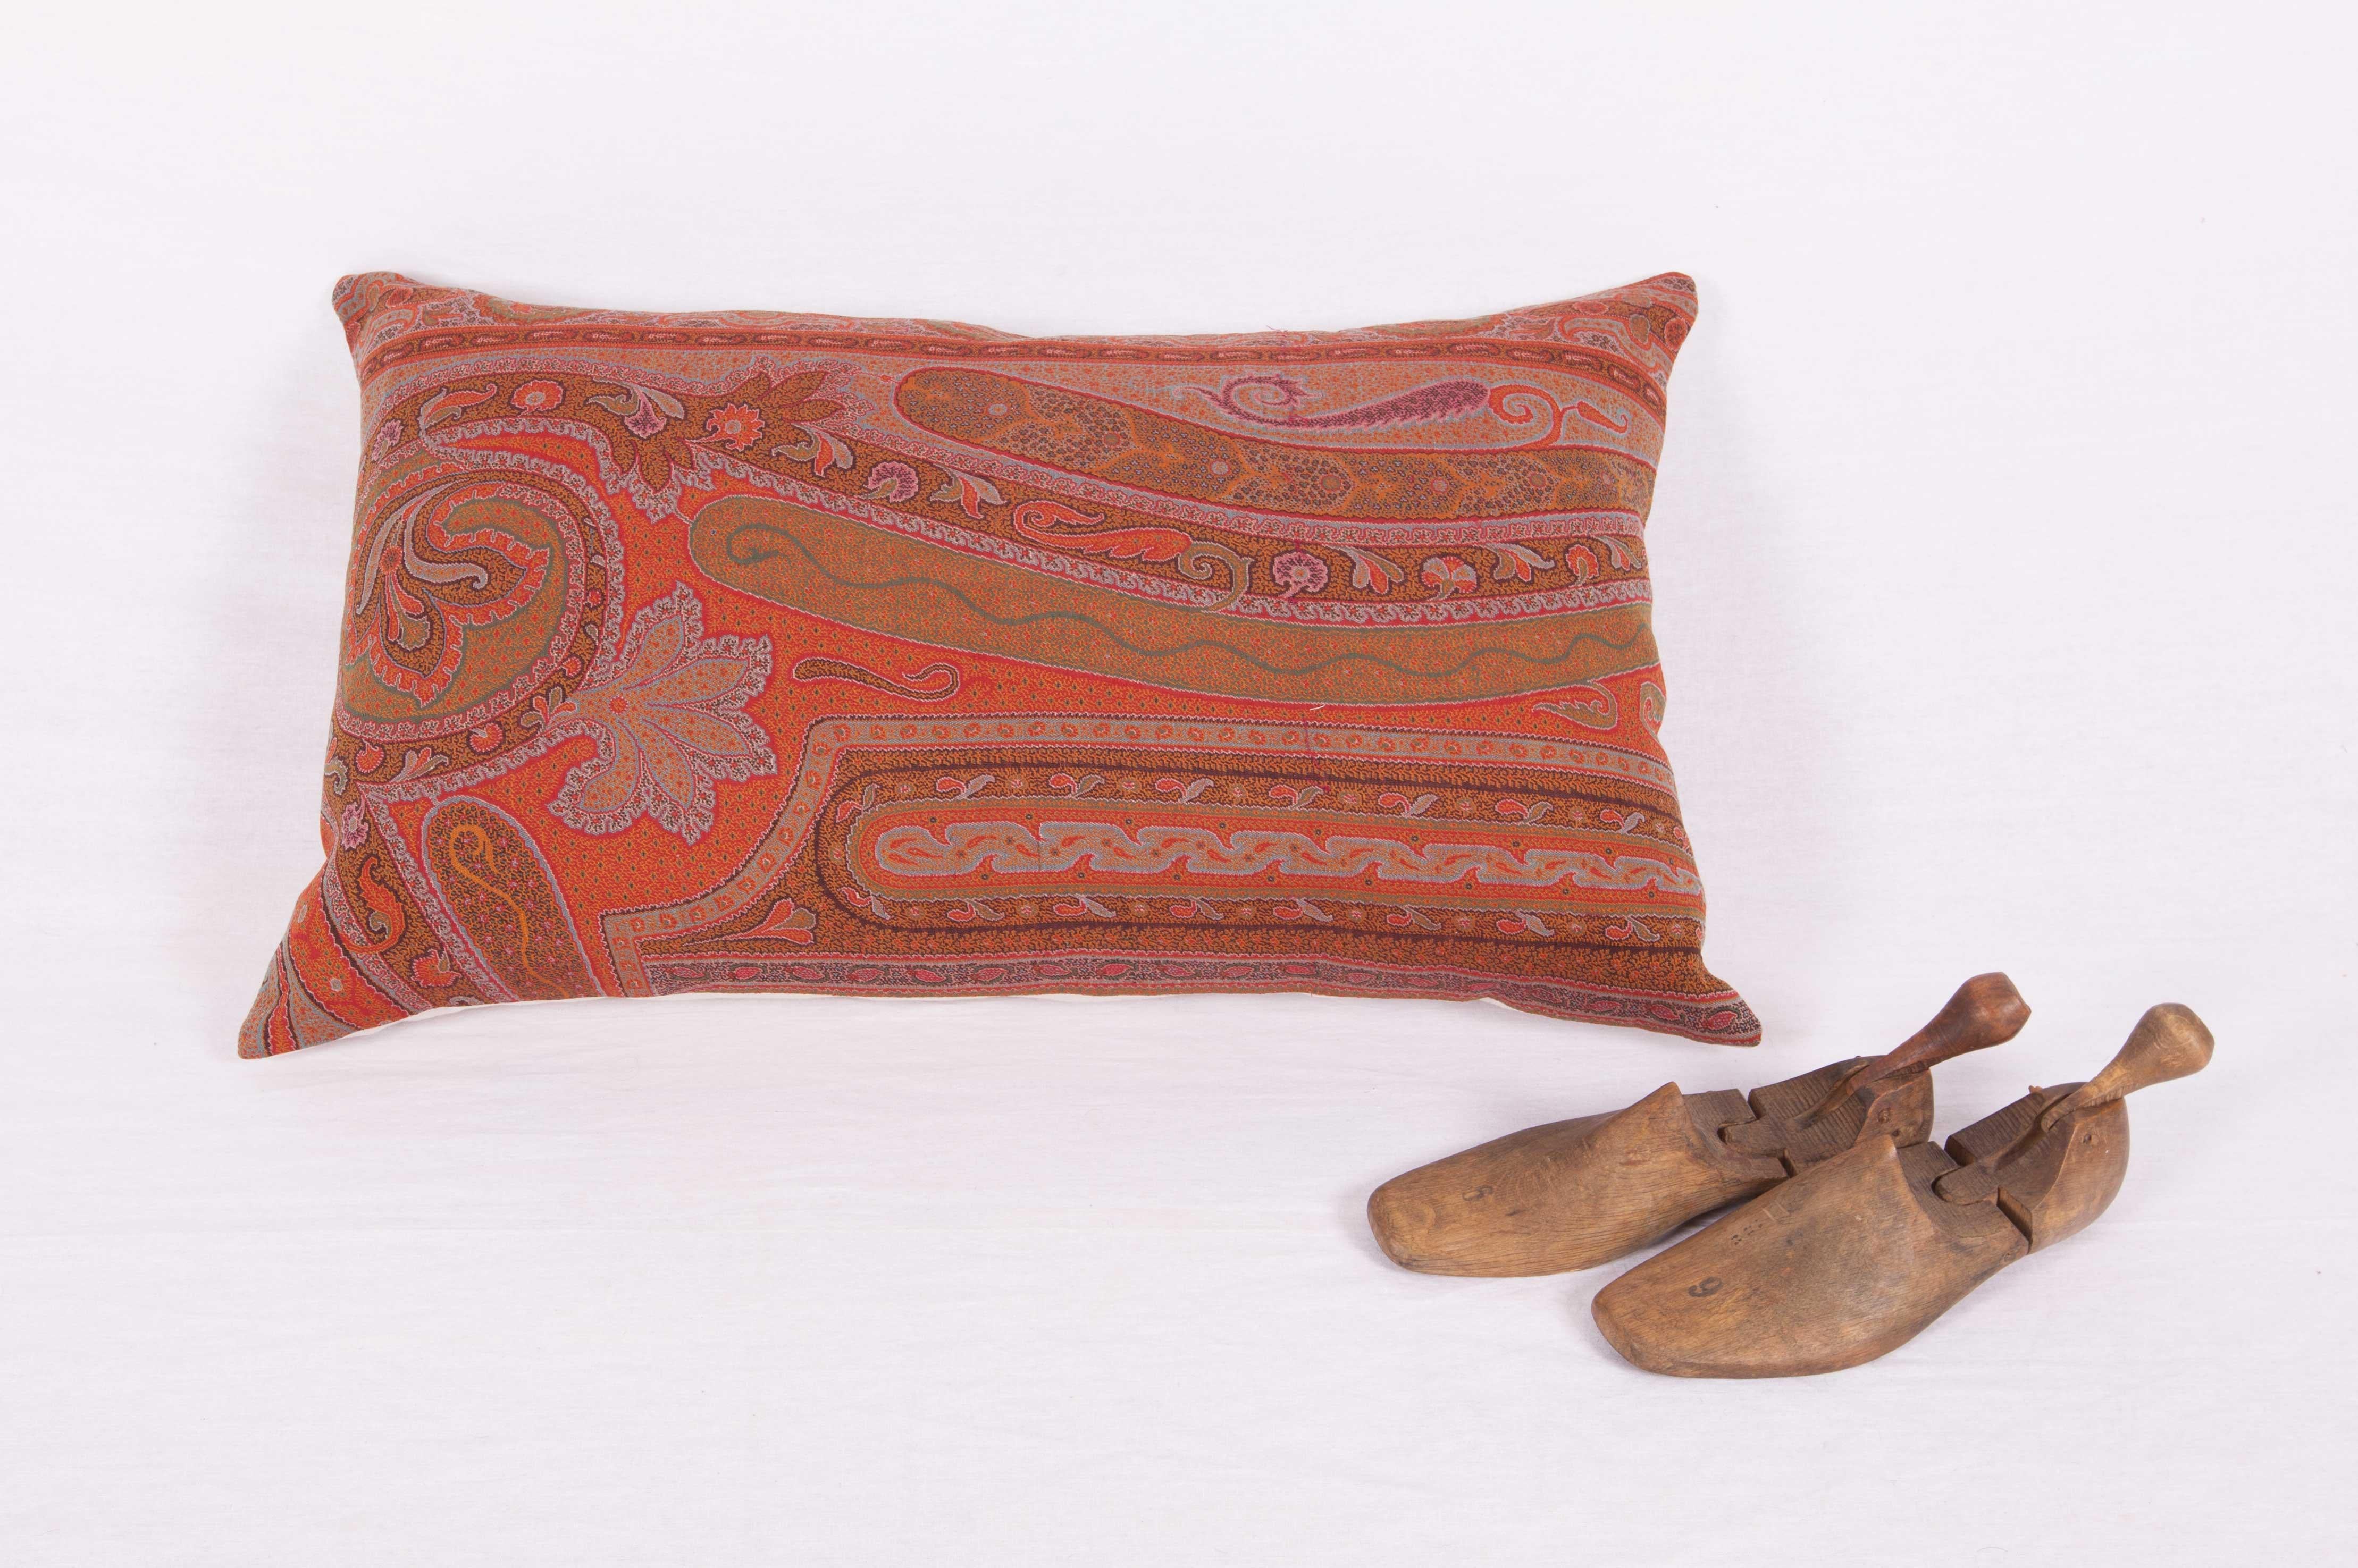 The pillow is made out of an early 19th century paisley shawl. It does not come with an insert but it comes with a bag made to the size and out of cotton to accommodate the filling. The backing is made of linen. Please Note: Filling is not provided.